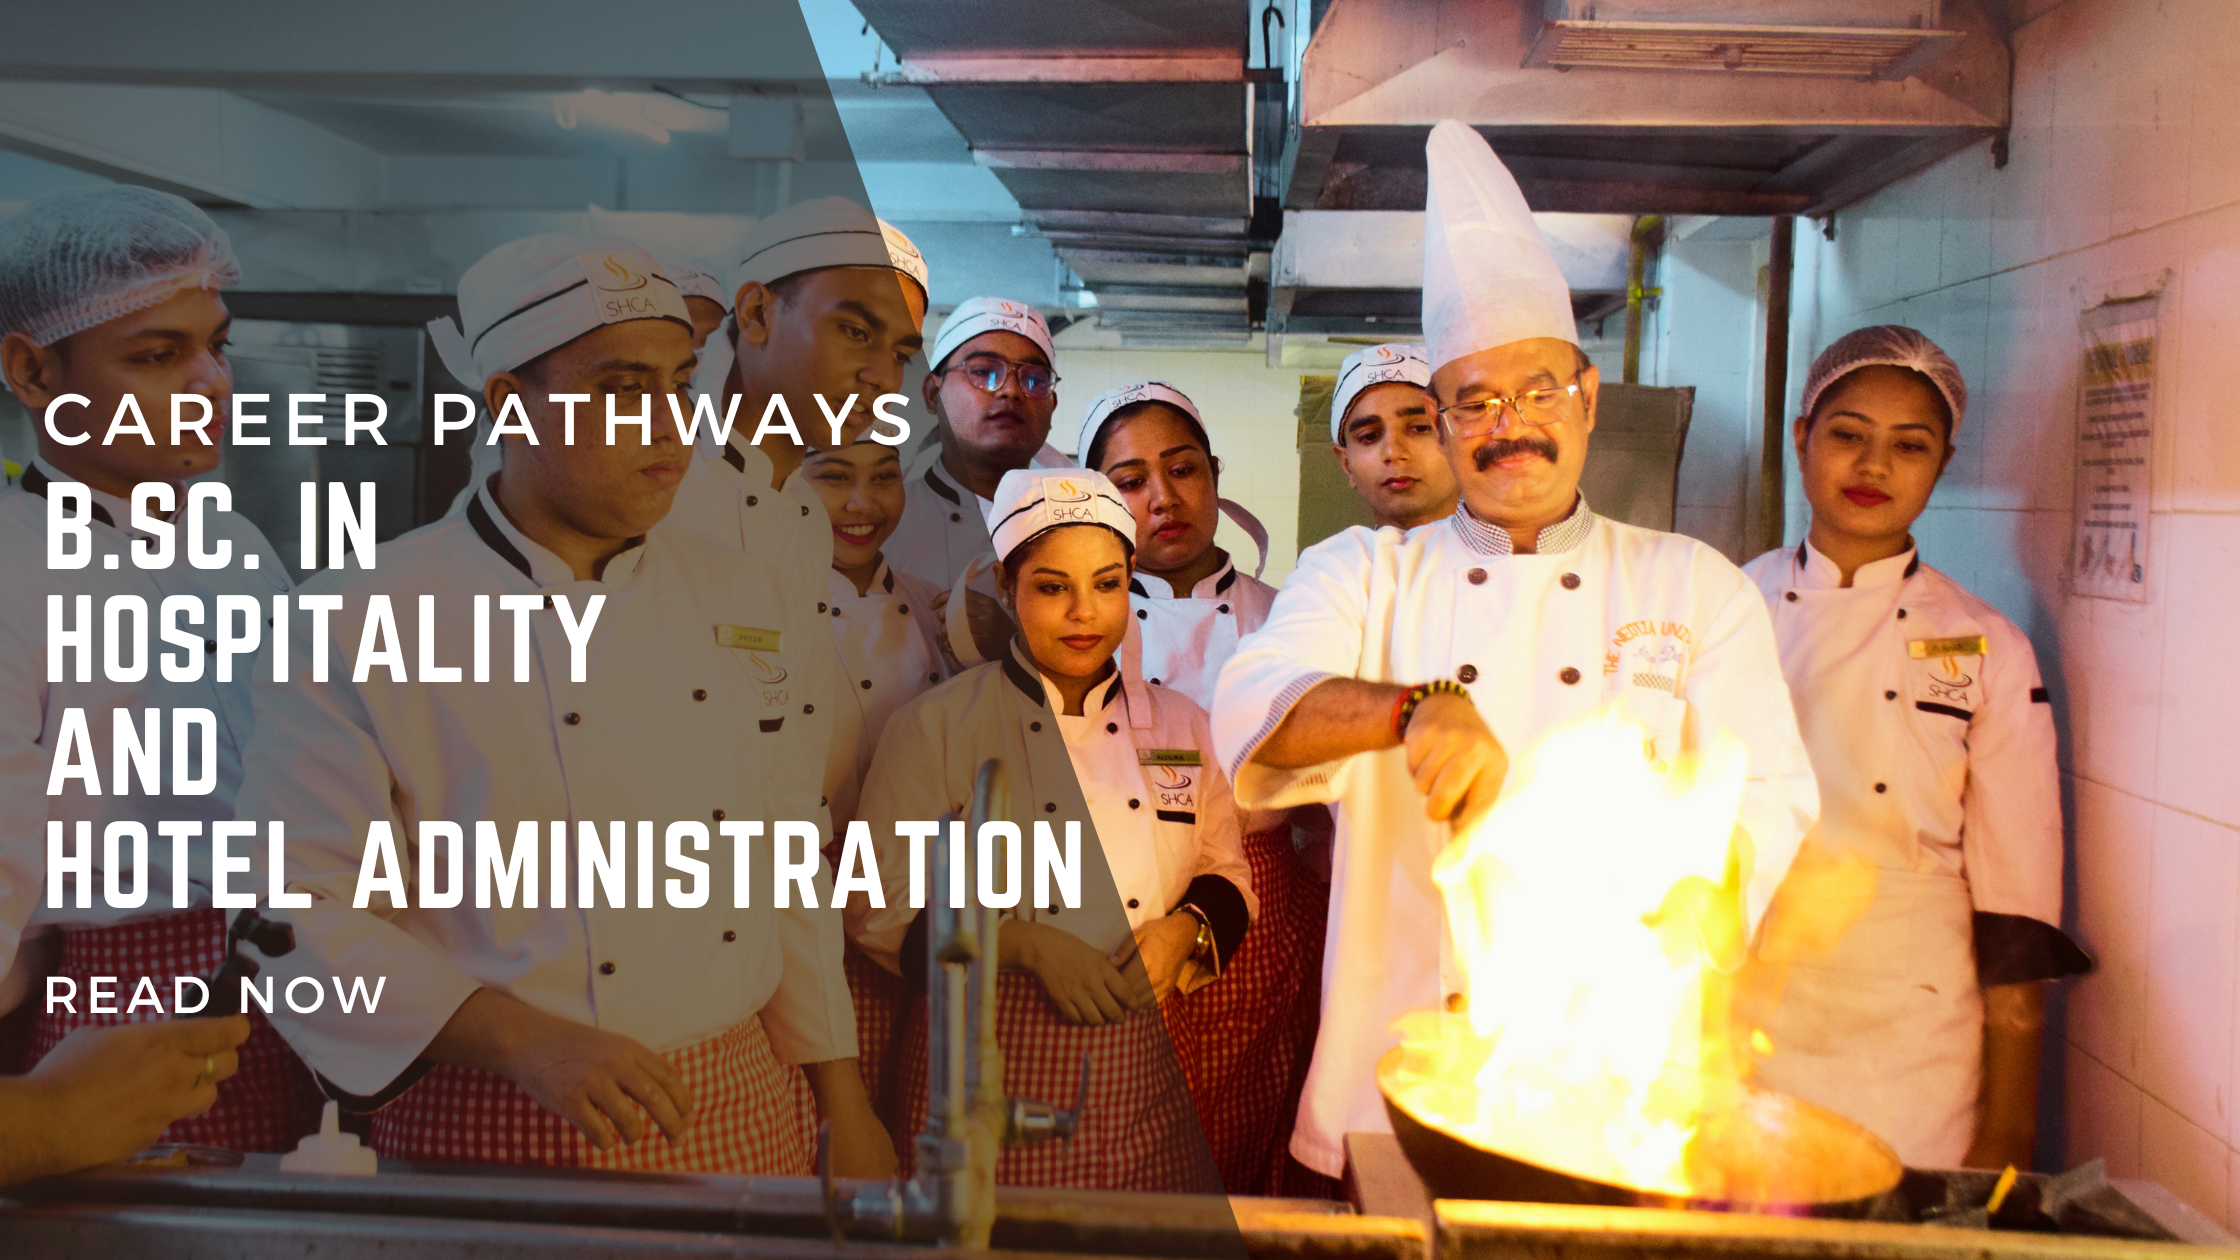 The chef of The Neotia University train his students about hospitality and culinary program